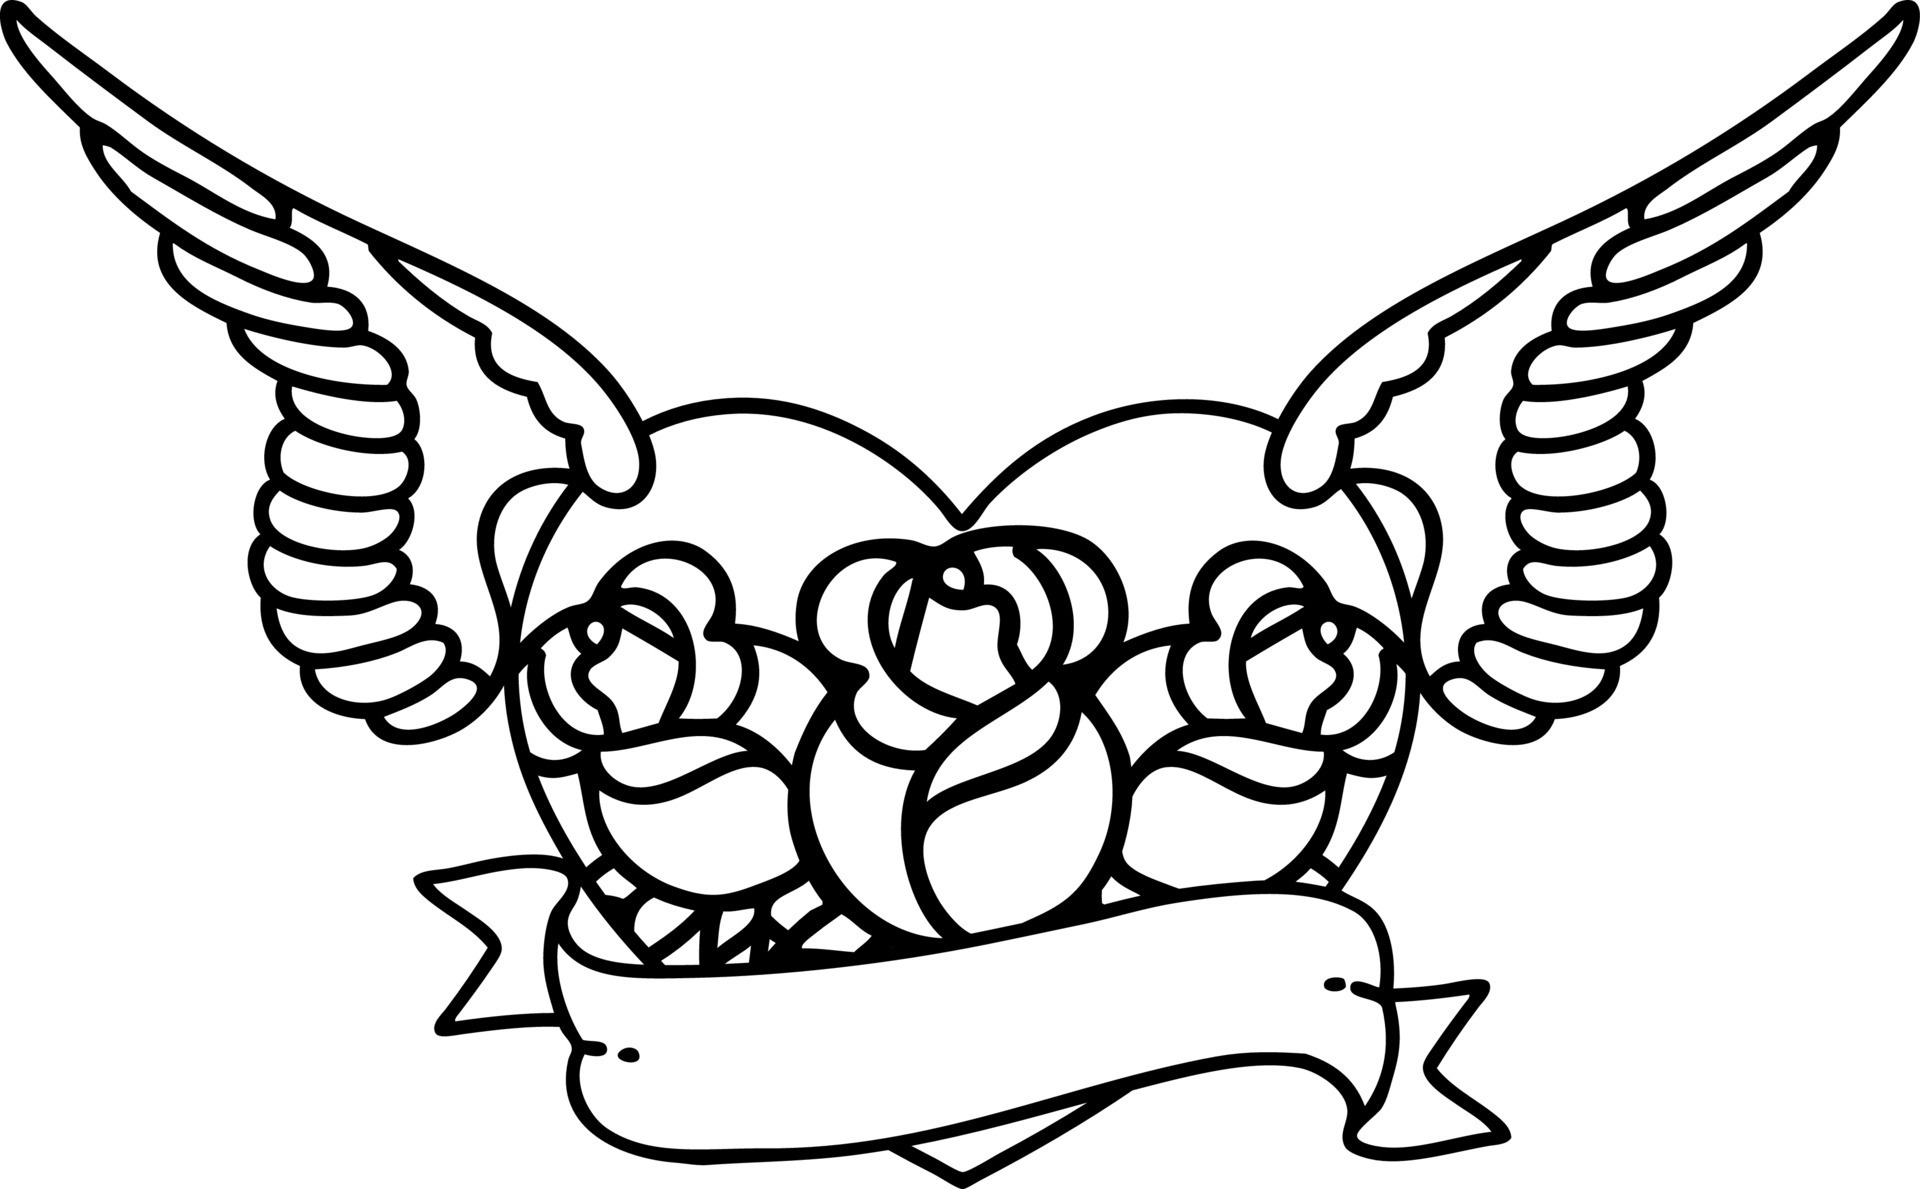 tattoo in black line style of a flying heart with flowers and banner ...